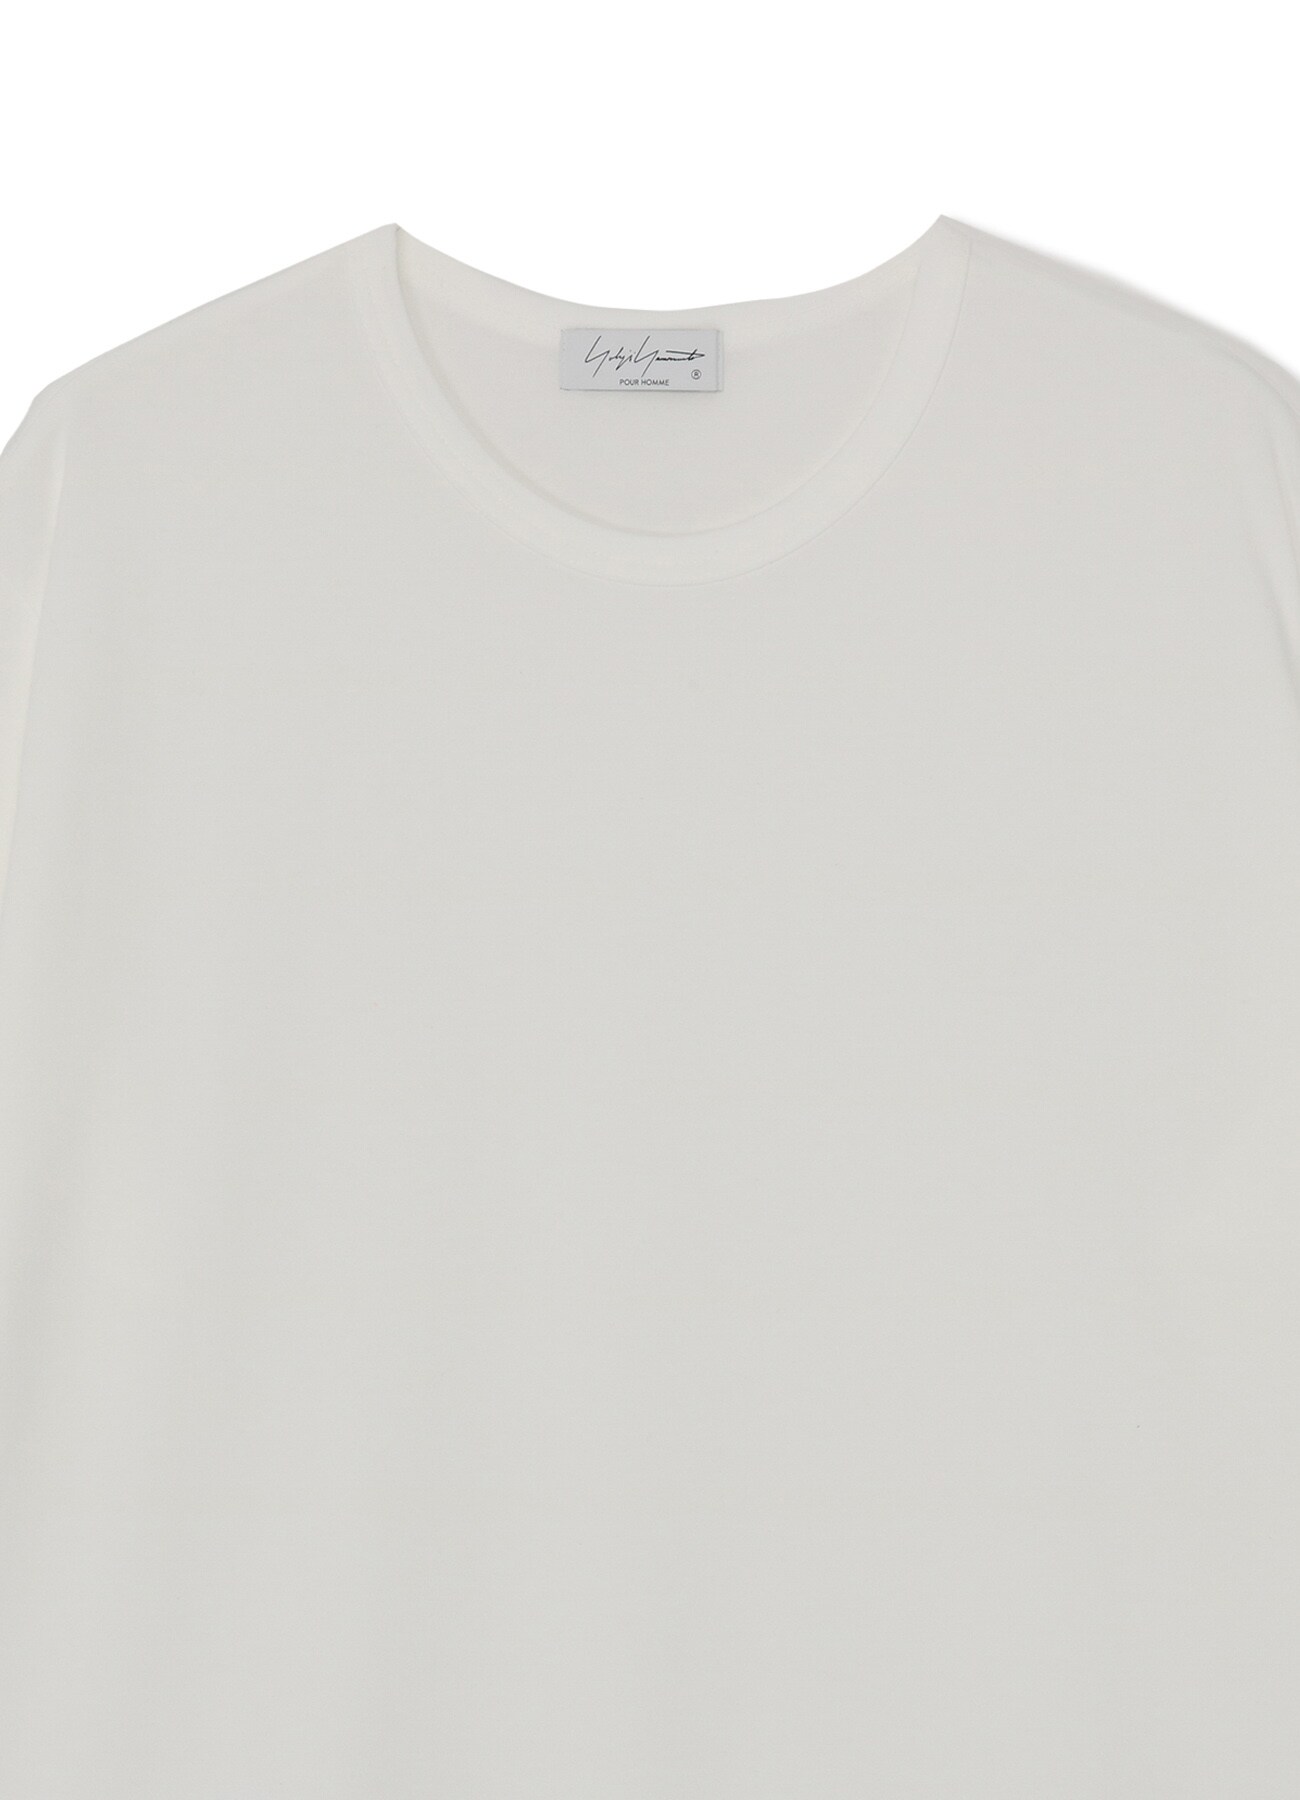 ULTIMA SILICON SOFTENED CREW NECK(M Off White): Vintage 1.2｜THE 